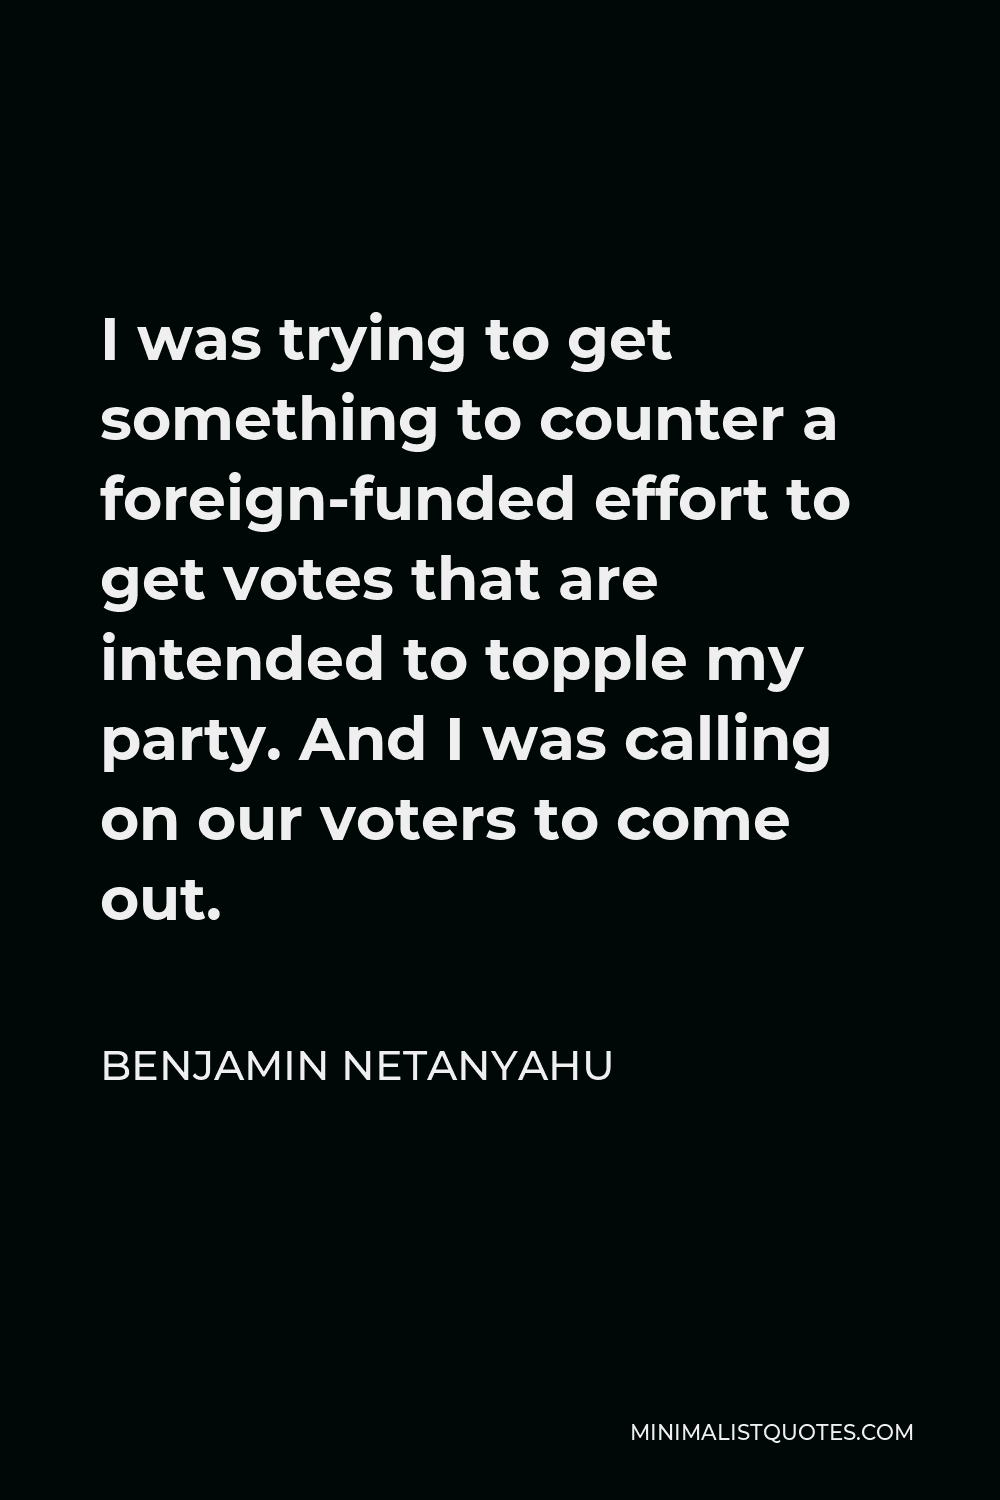 Benjamin Netanyahu Quote - I was trying to get something to counter a foreign-funded effort to get votes that are intended to topple my party. And I was calling on our voters to come out.